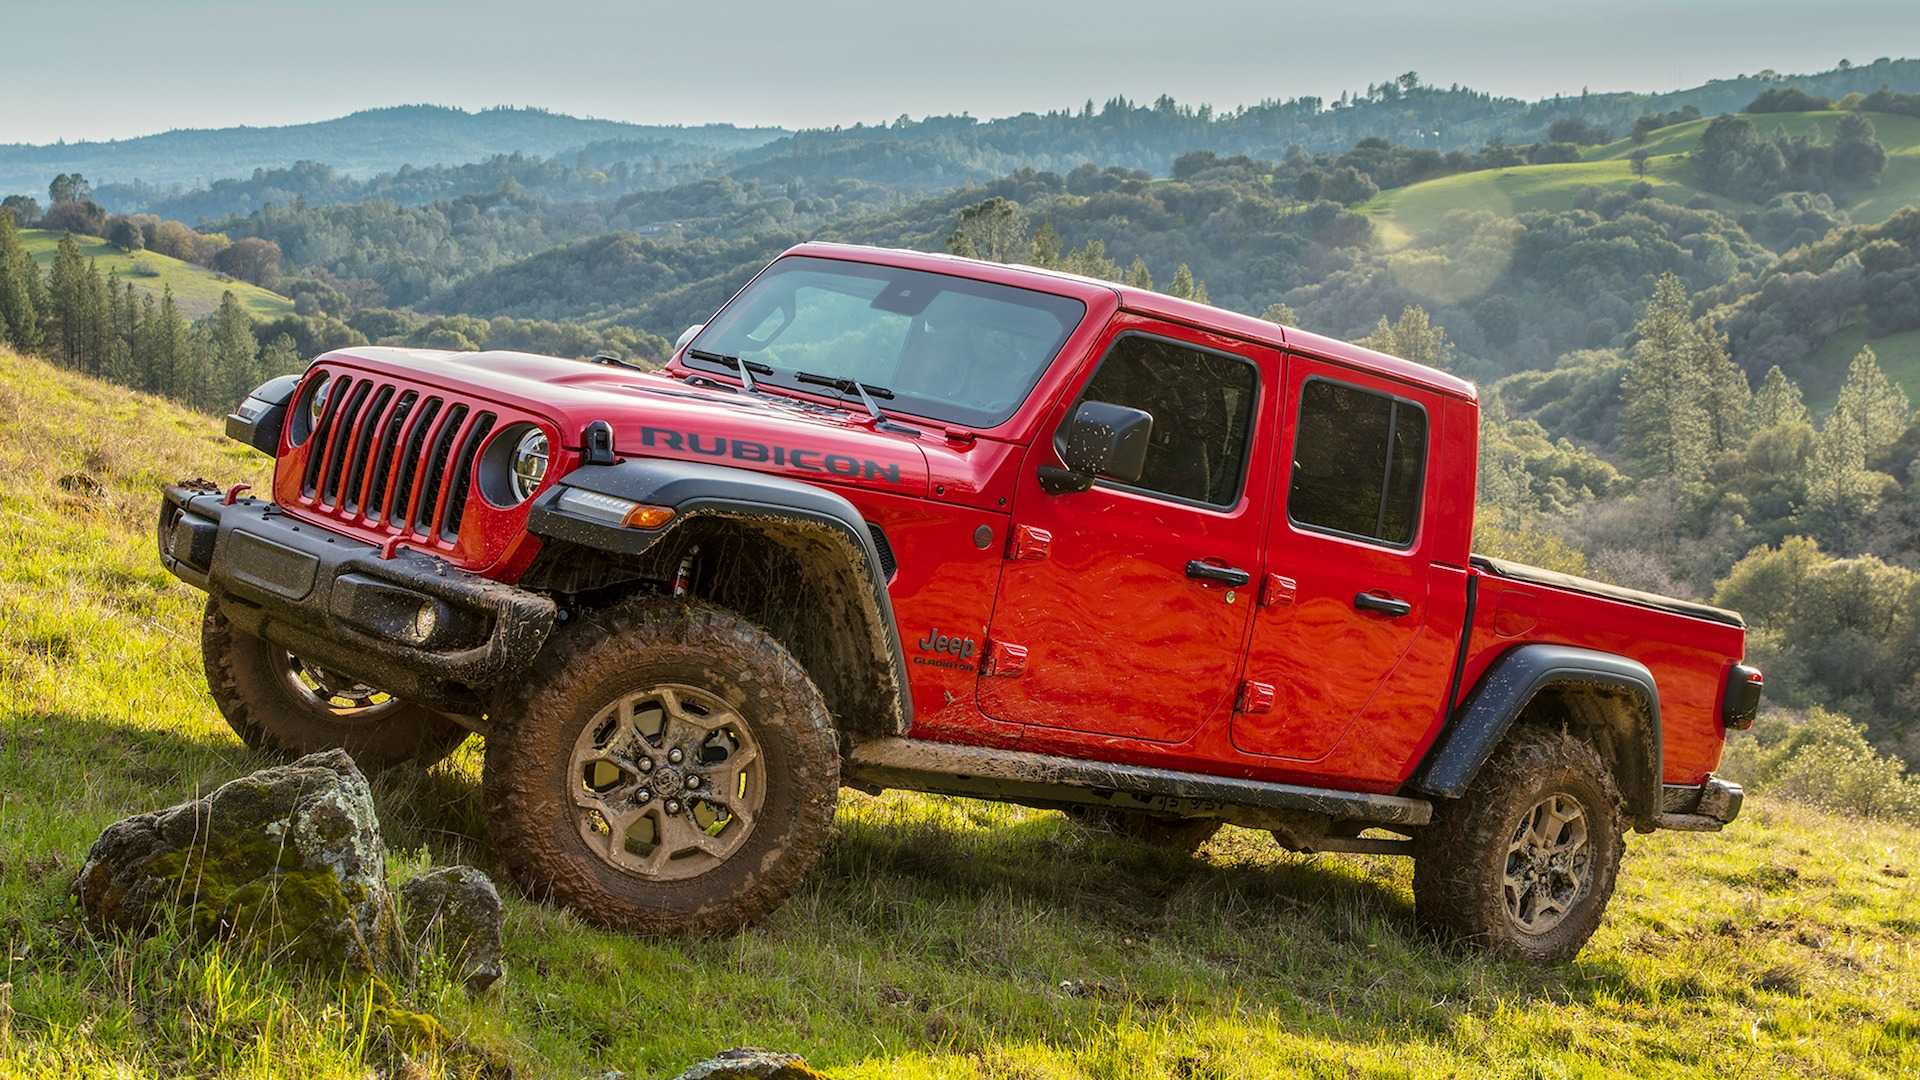 These Jeep Gladiator Photos Are Straight Up Off Road Porn